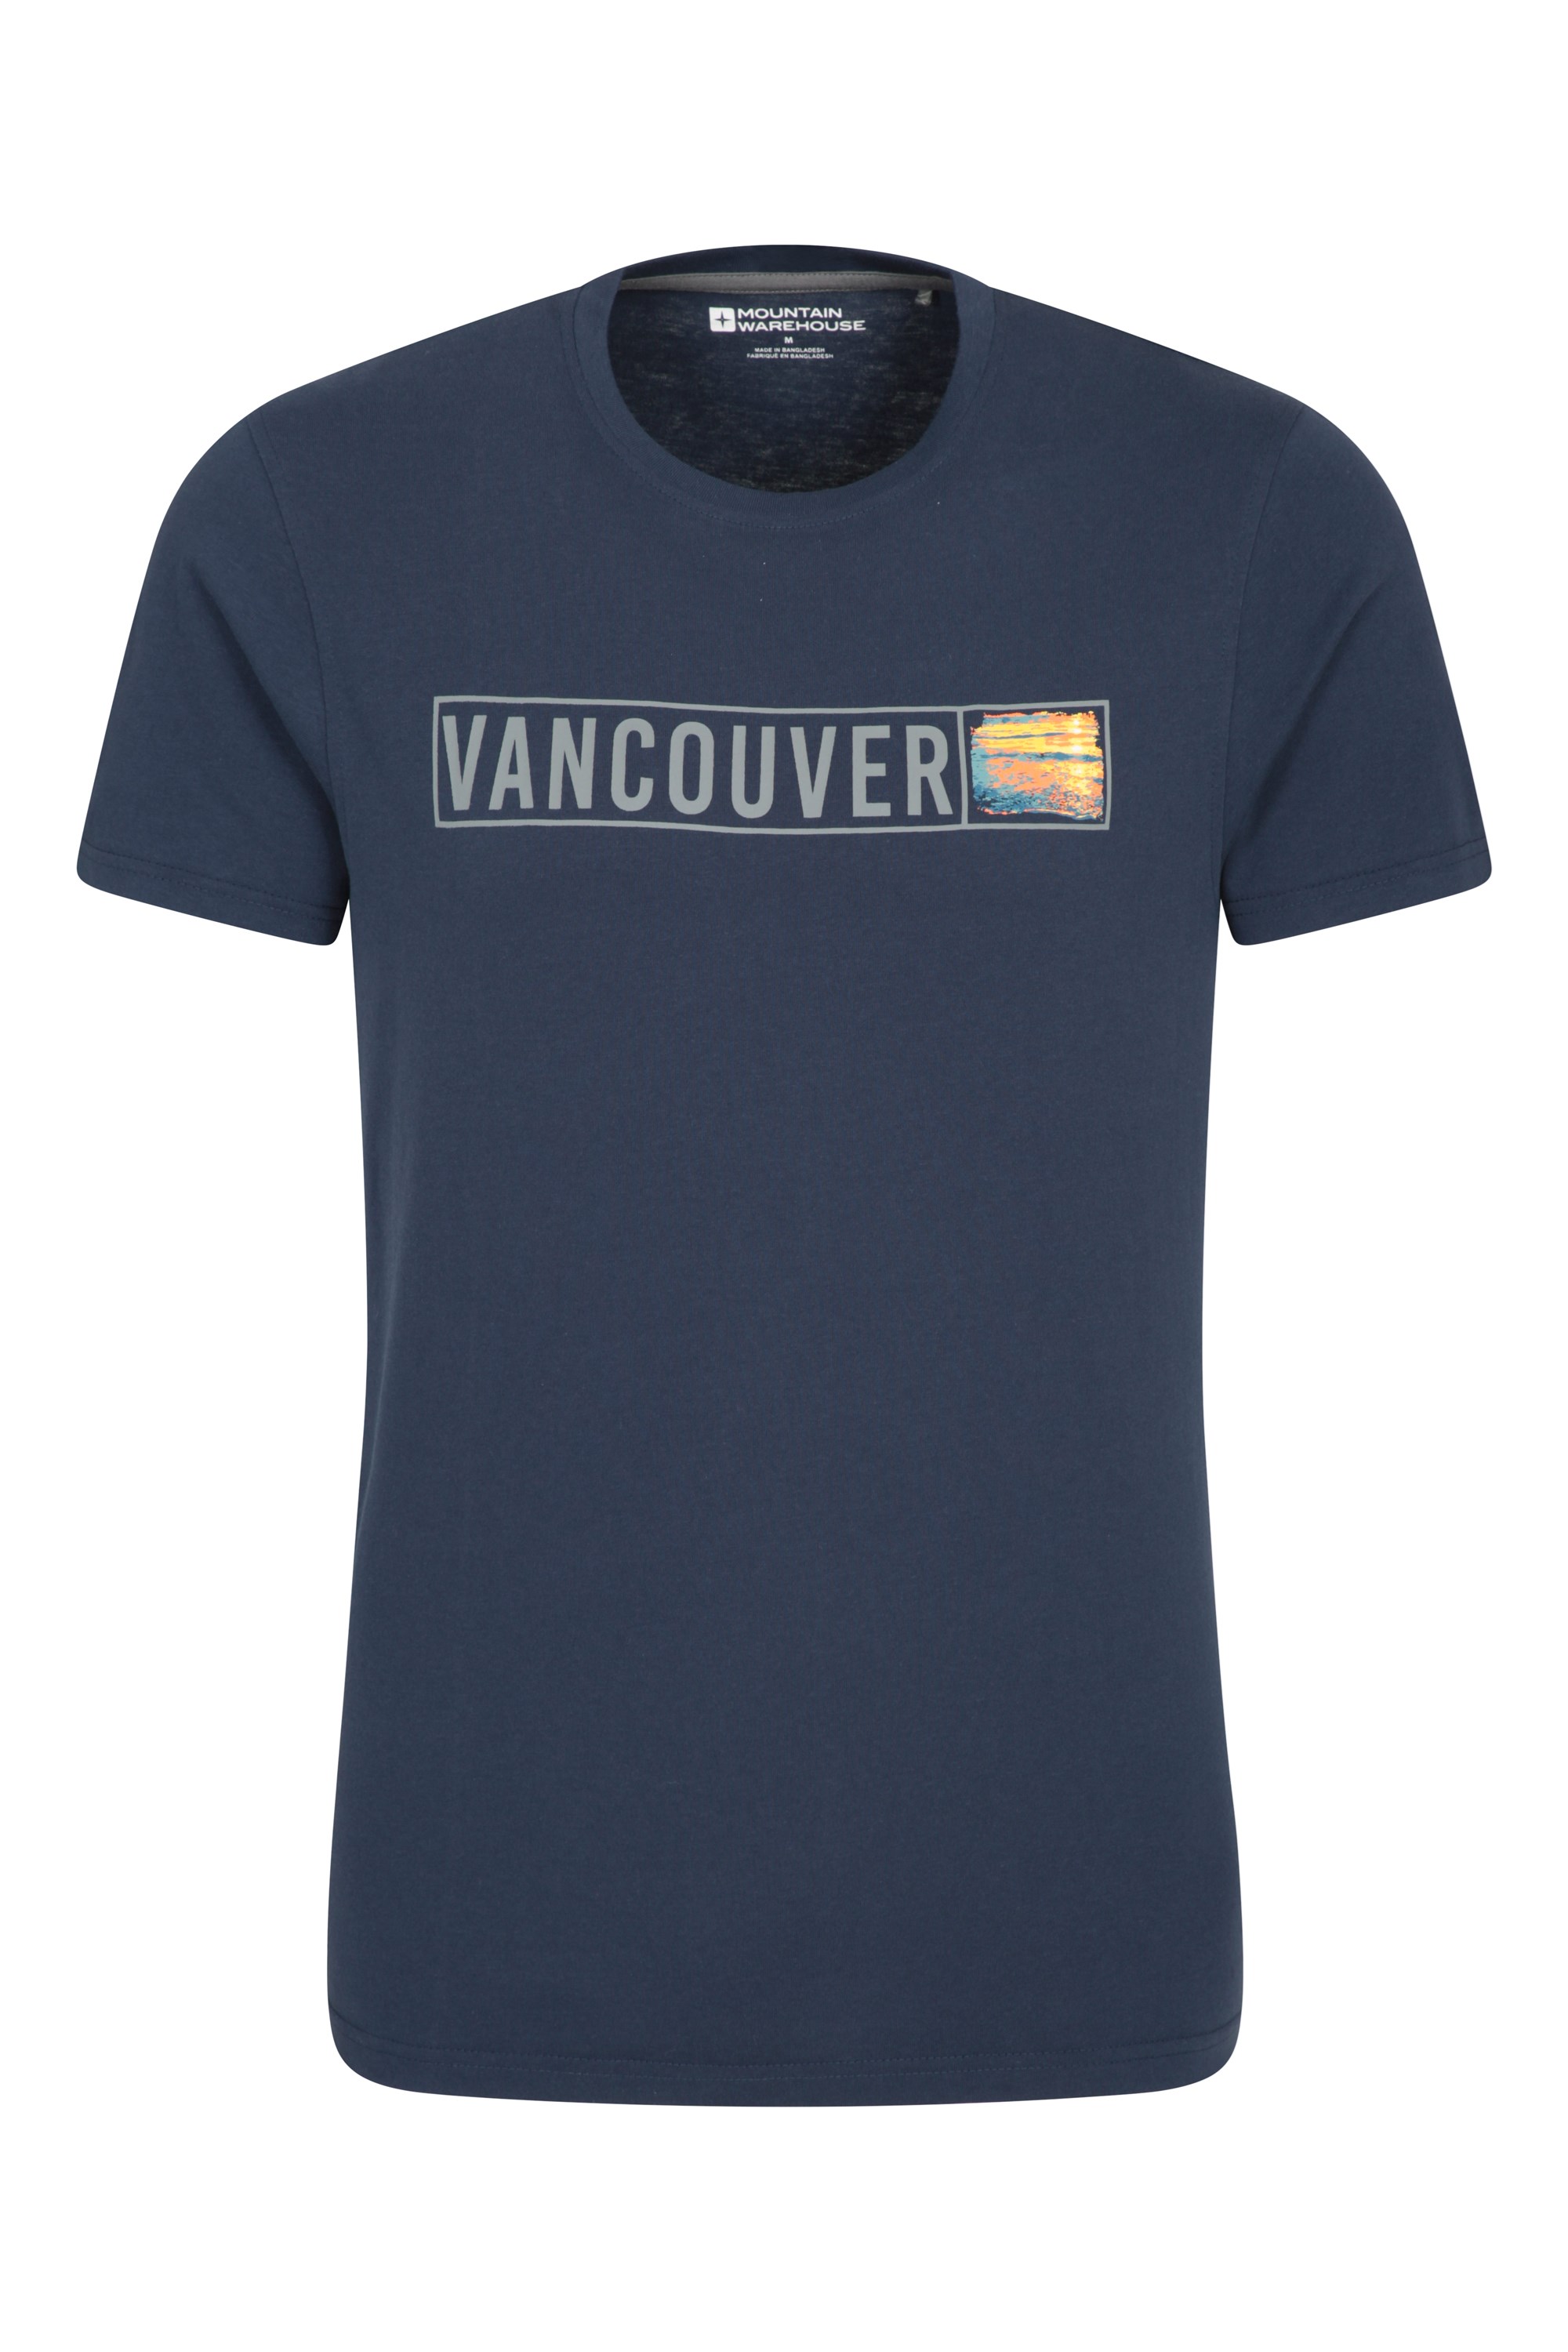 Vancouver Mens Long-Sleeve Top - Navy